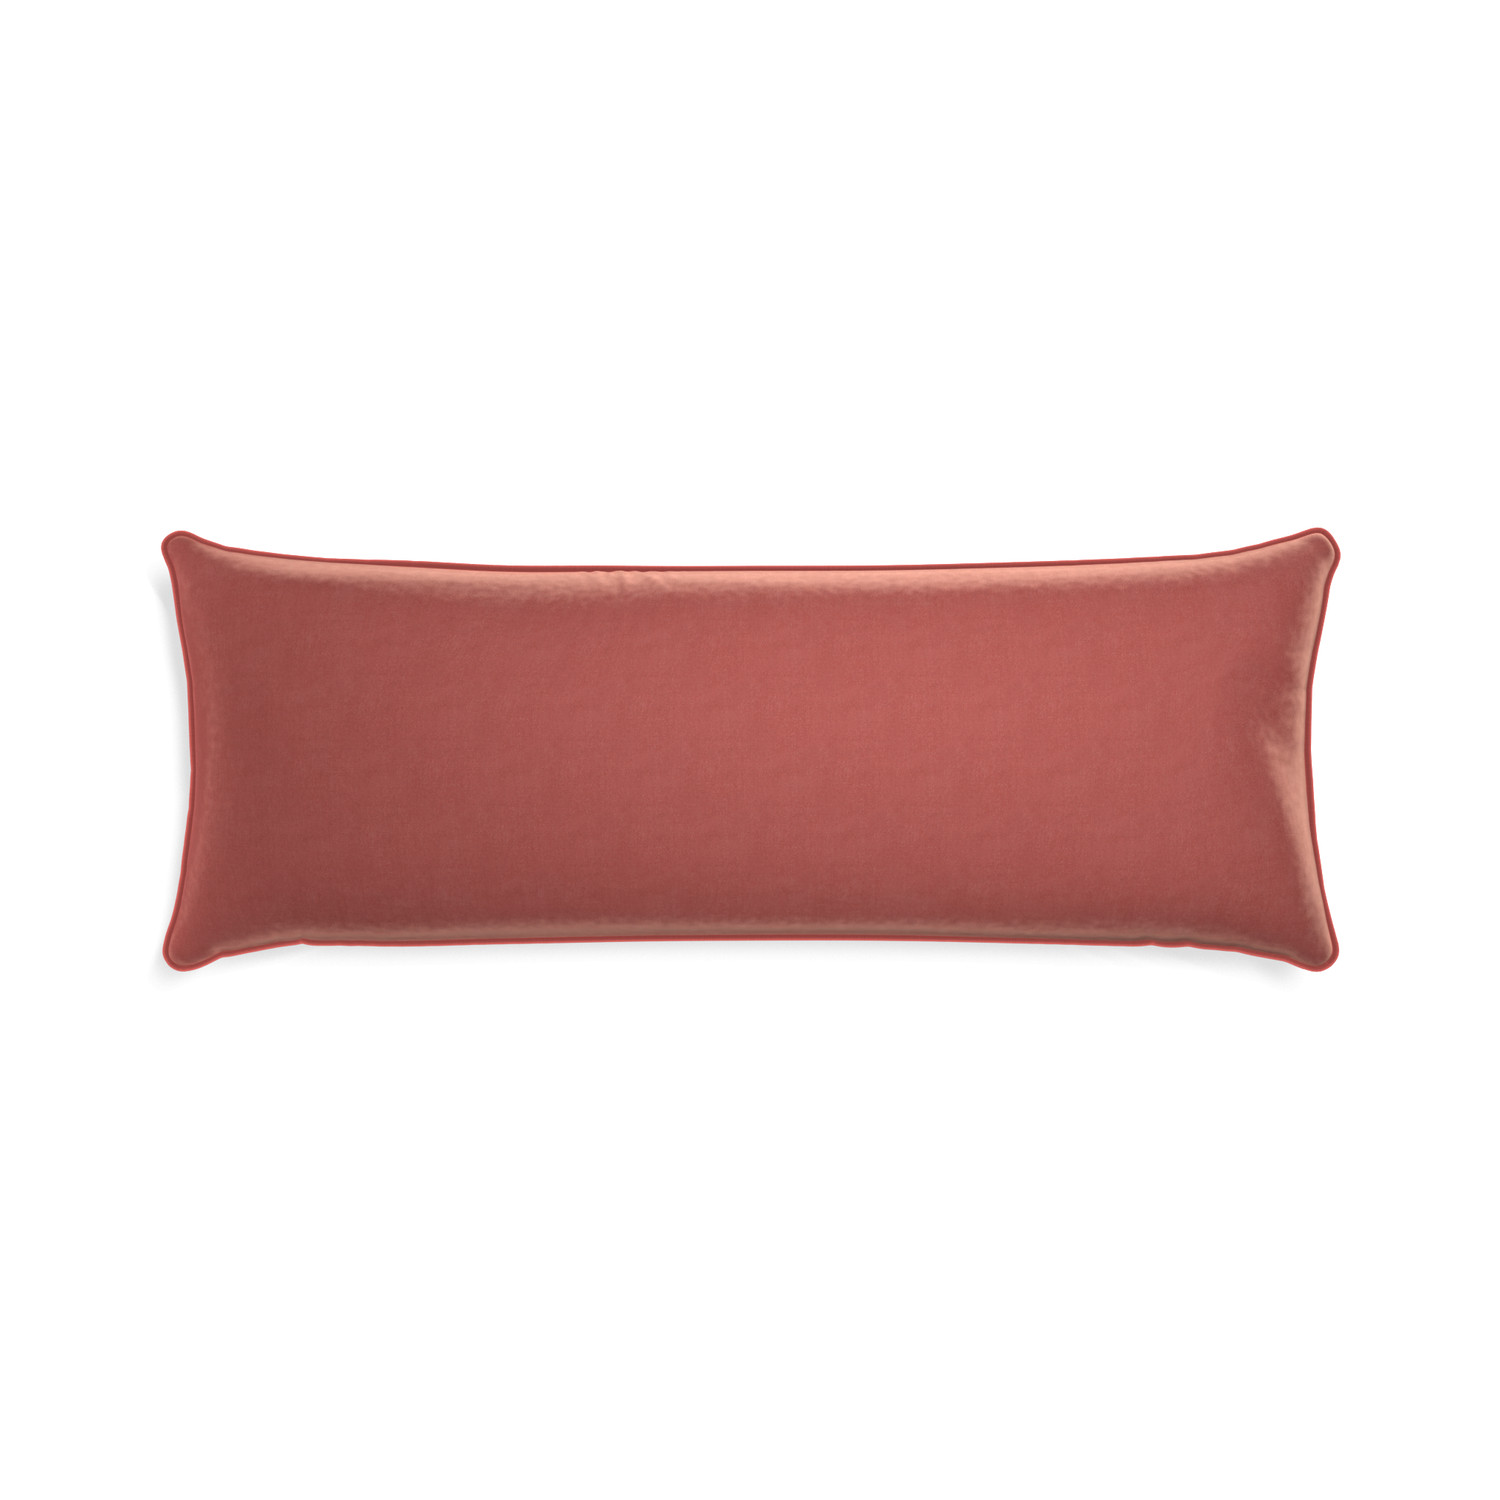 Xl-lumbar cosmo velvet custom pillow with c piping on white background